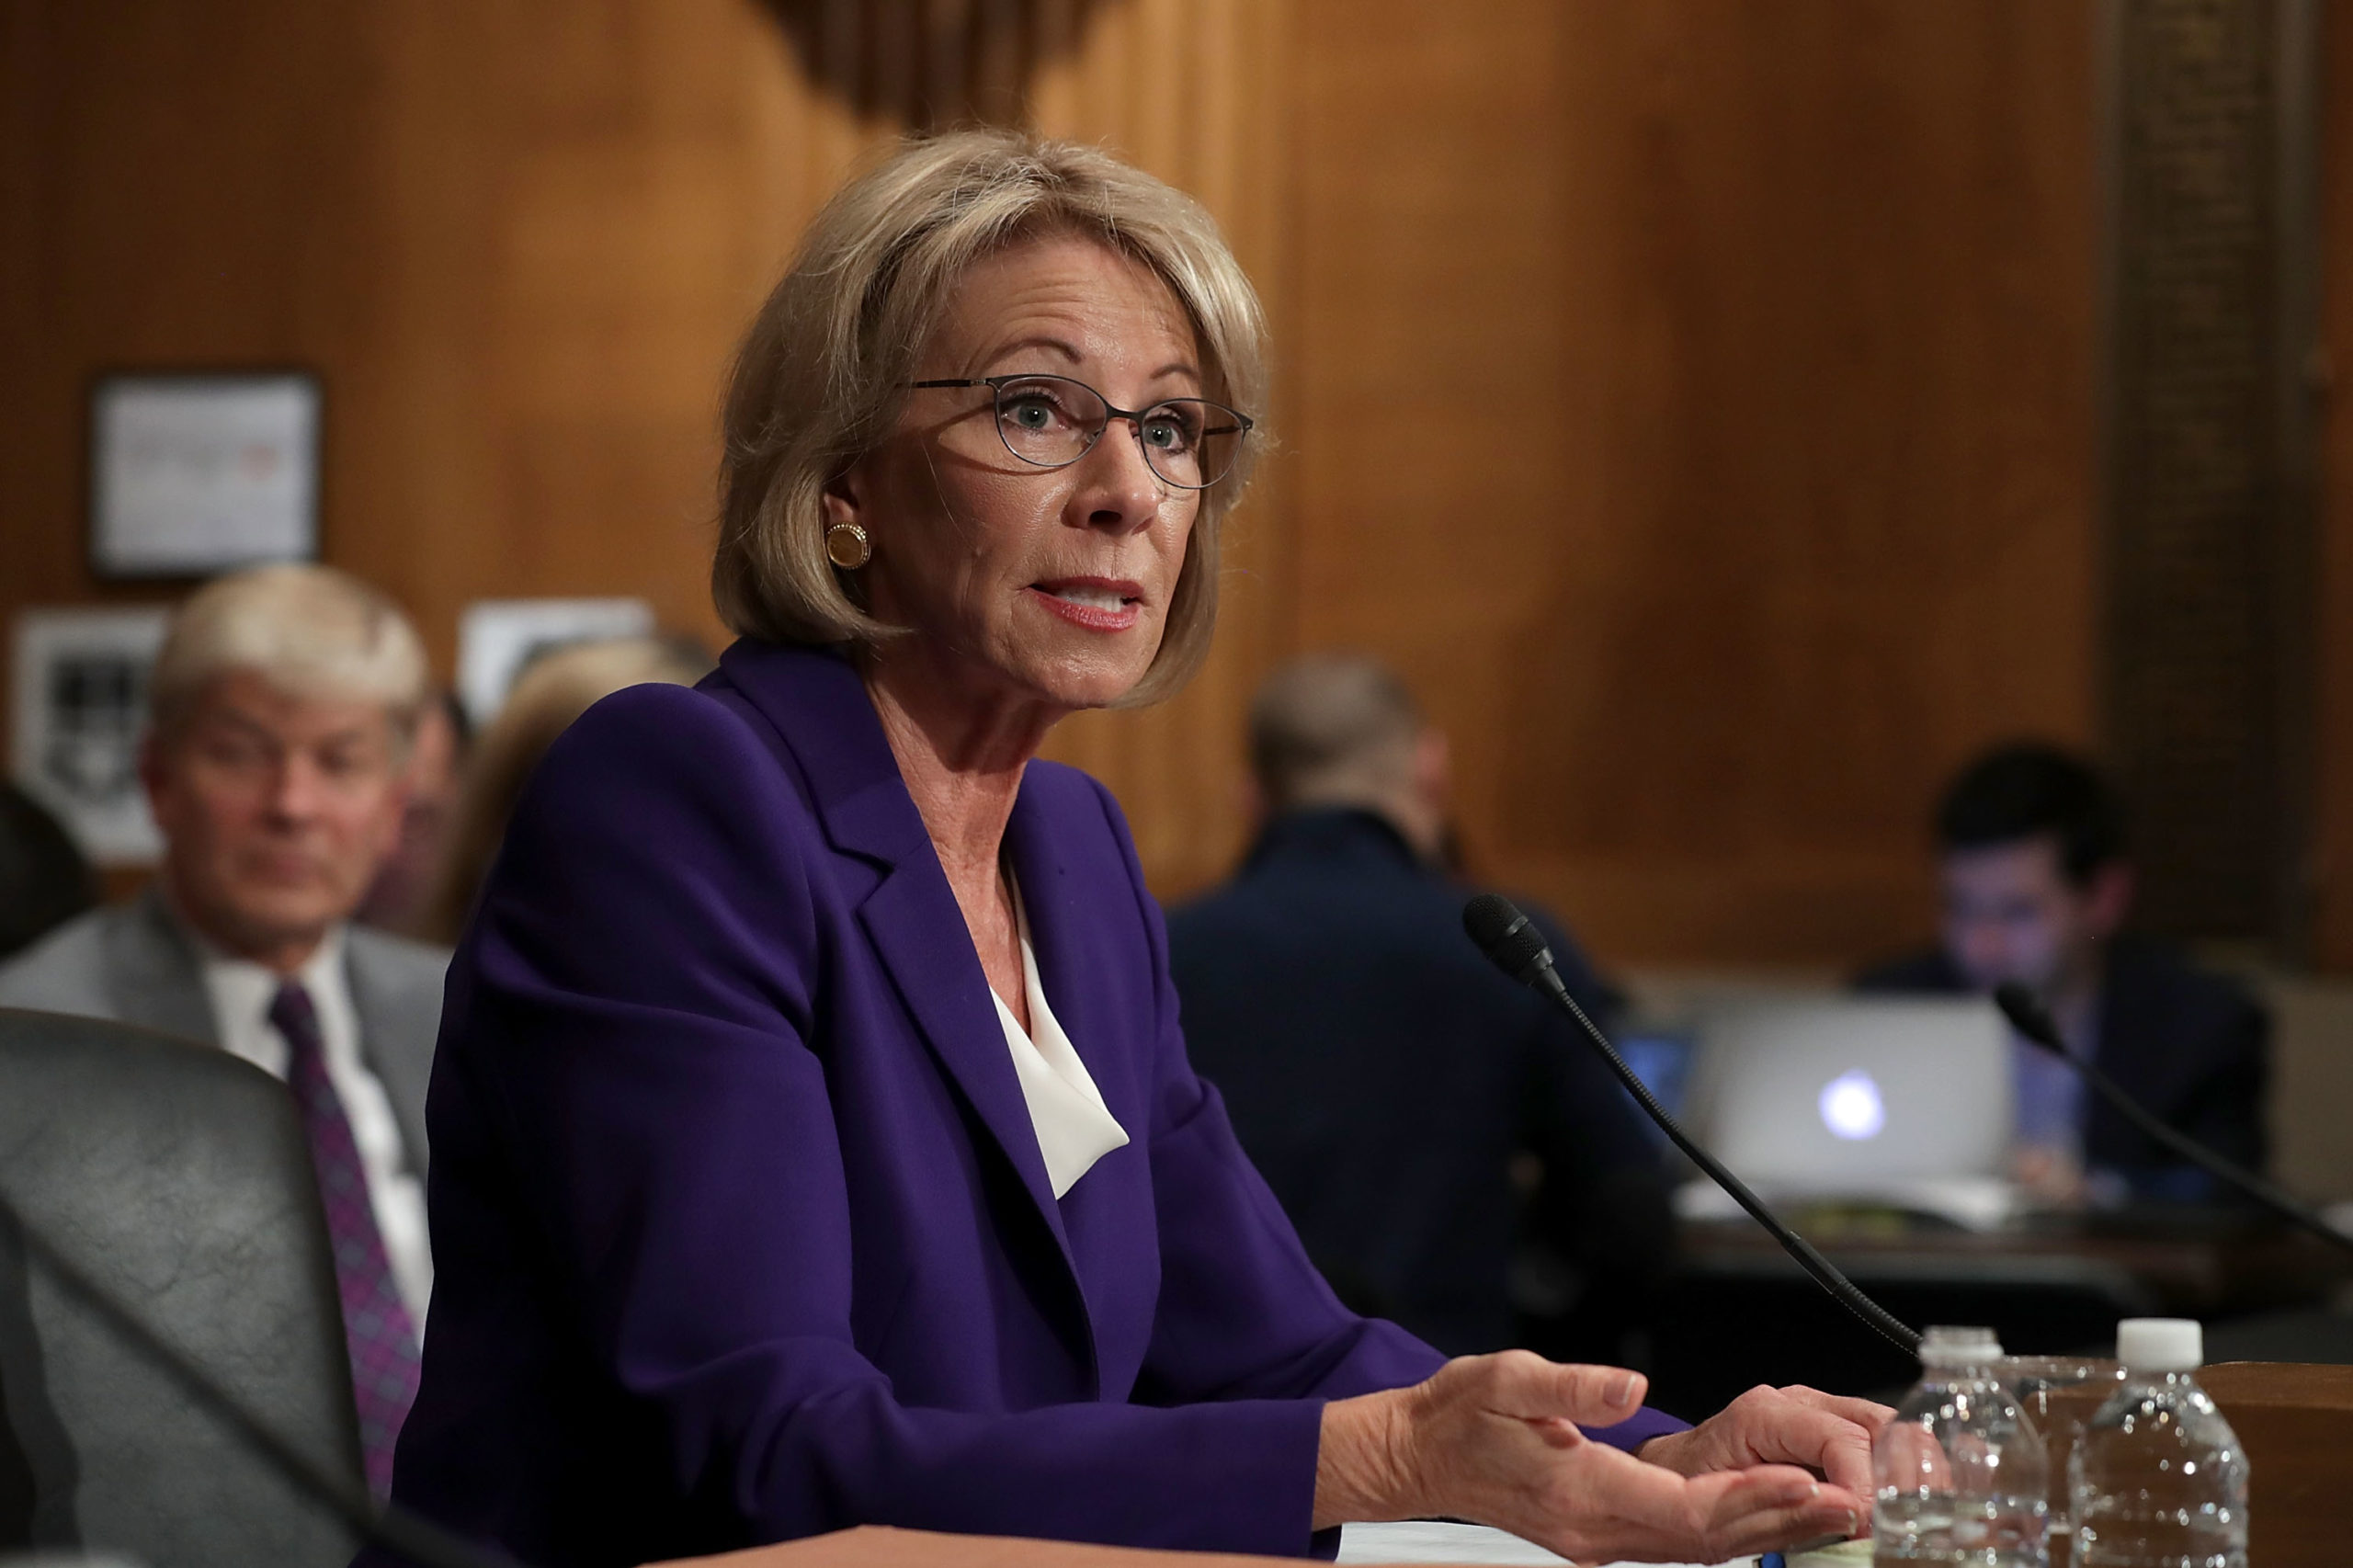 WASHINGTON, DC - JANUARY 17: Betsy DeVos, President-elect Donald Trump's pick to be the next Secretary of Education, testifies during her confirmation hearing before the Senate Health, Education, Labor and Pensions Committee in the Dirksen Senate Office Building on Capitol Hill January 17, 2017 in Washington, DC. DeVos is known for her advocacy of school choice and education voucher programs and is a long-time leader of the Republican Party in Michigan. (Photo by Chip Somodevilla/Getty Images)